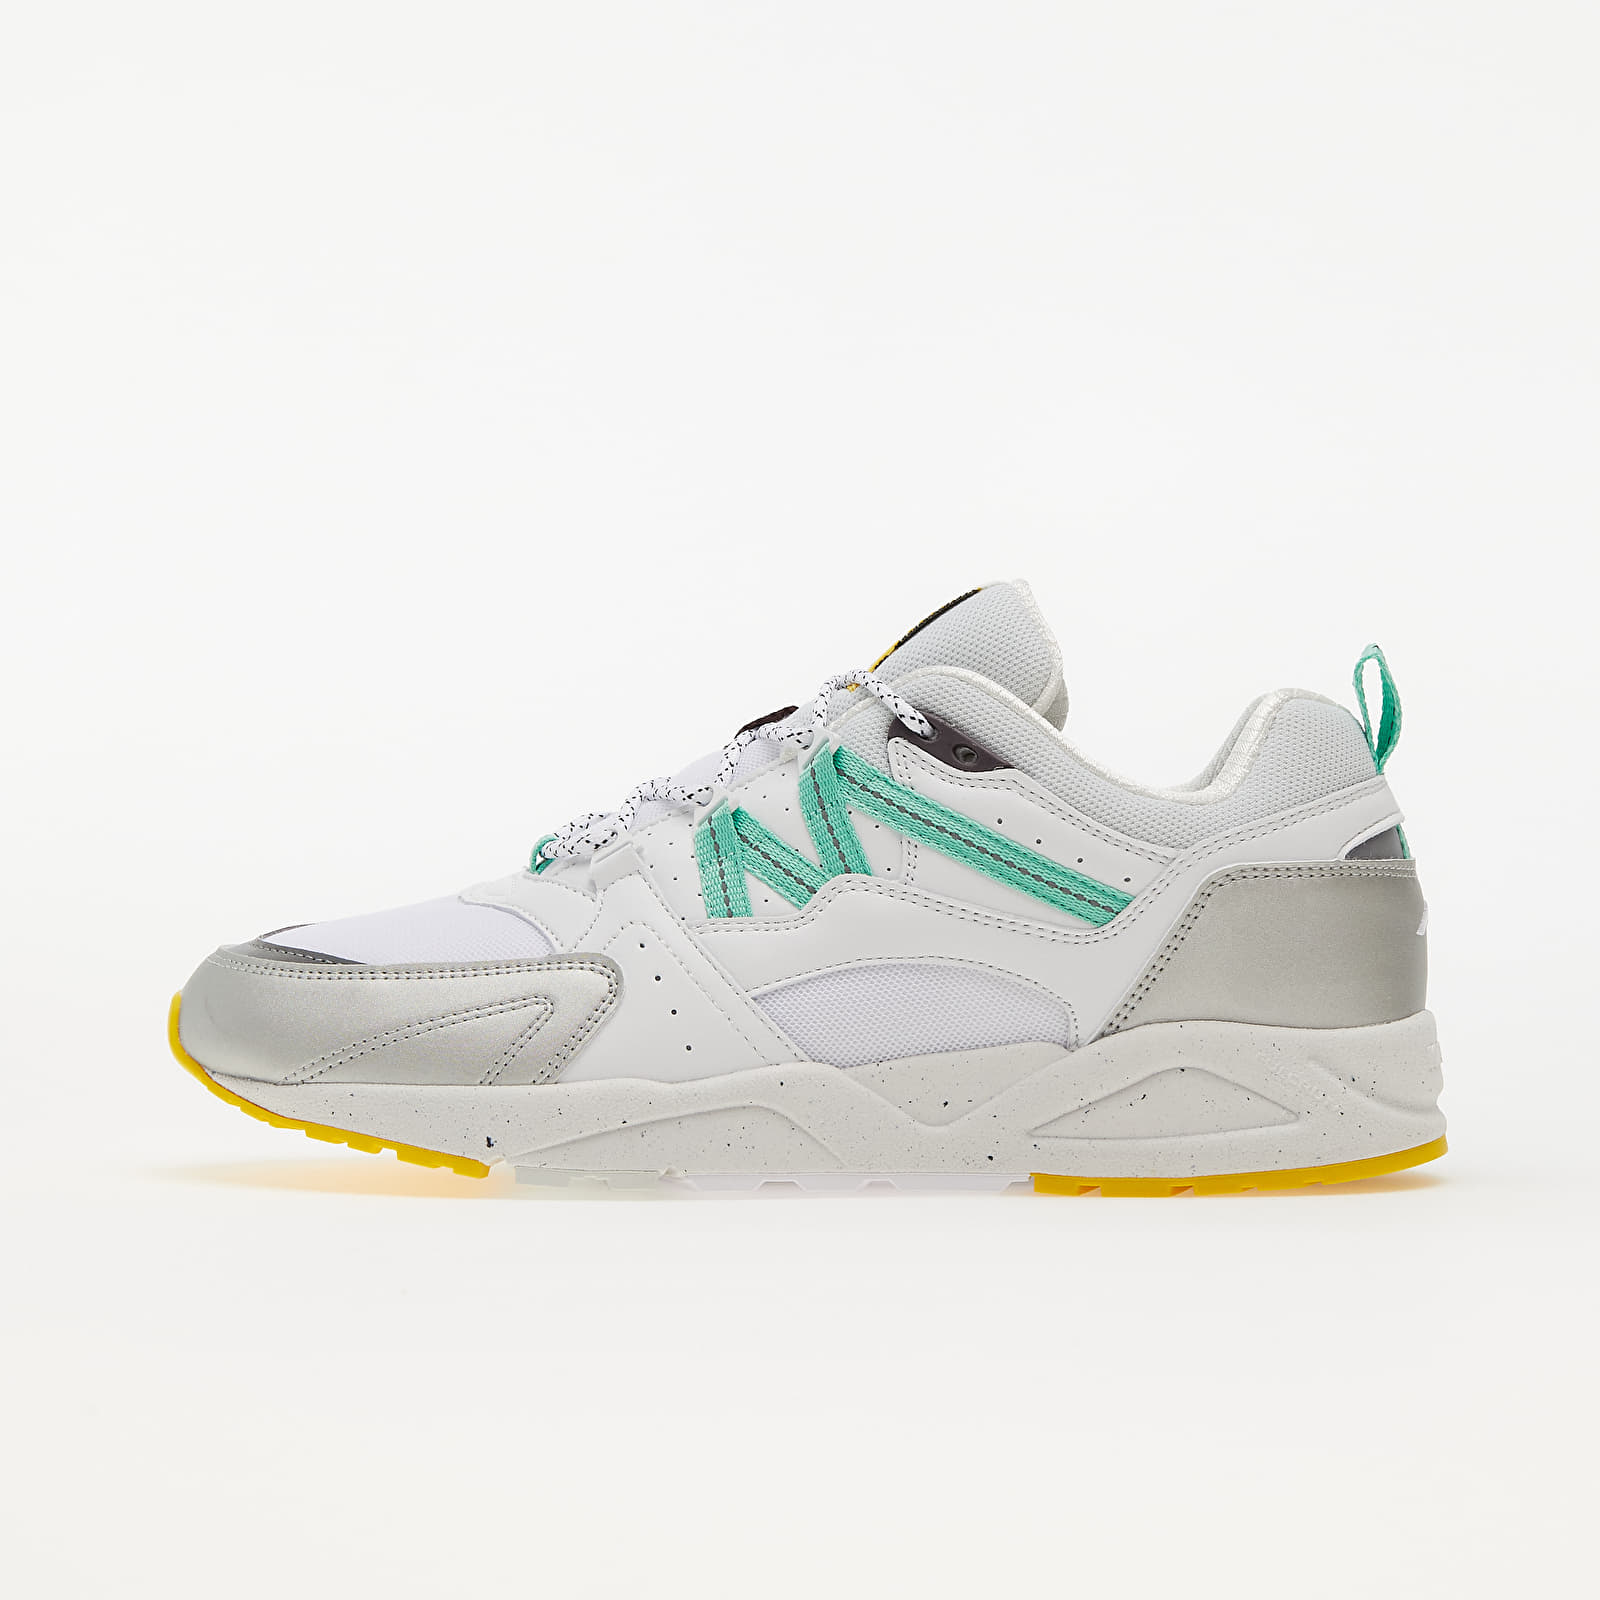 Chaussures et baskets homme Karhu Fusion 2.0 Silver/ White